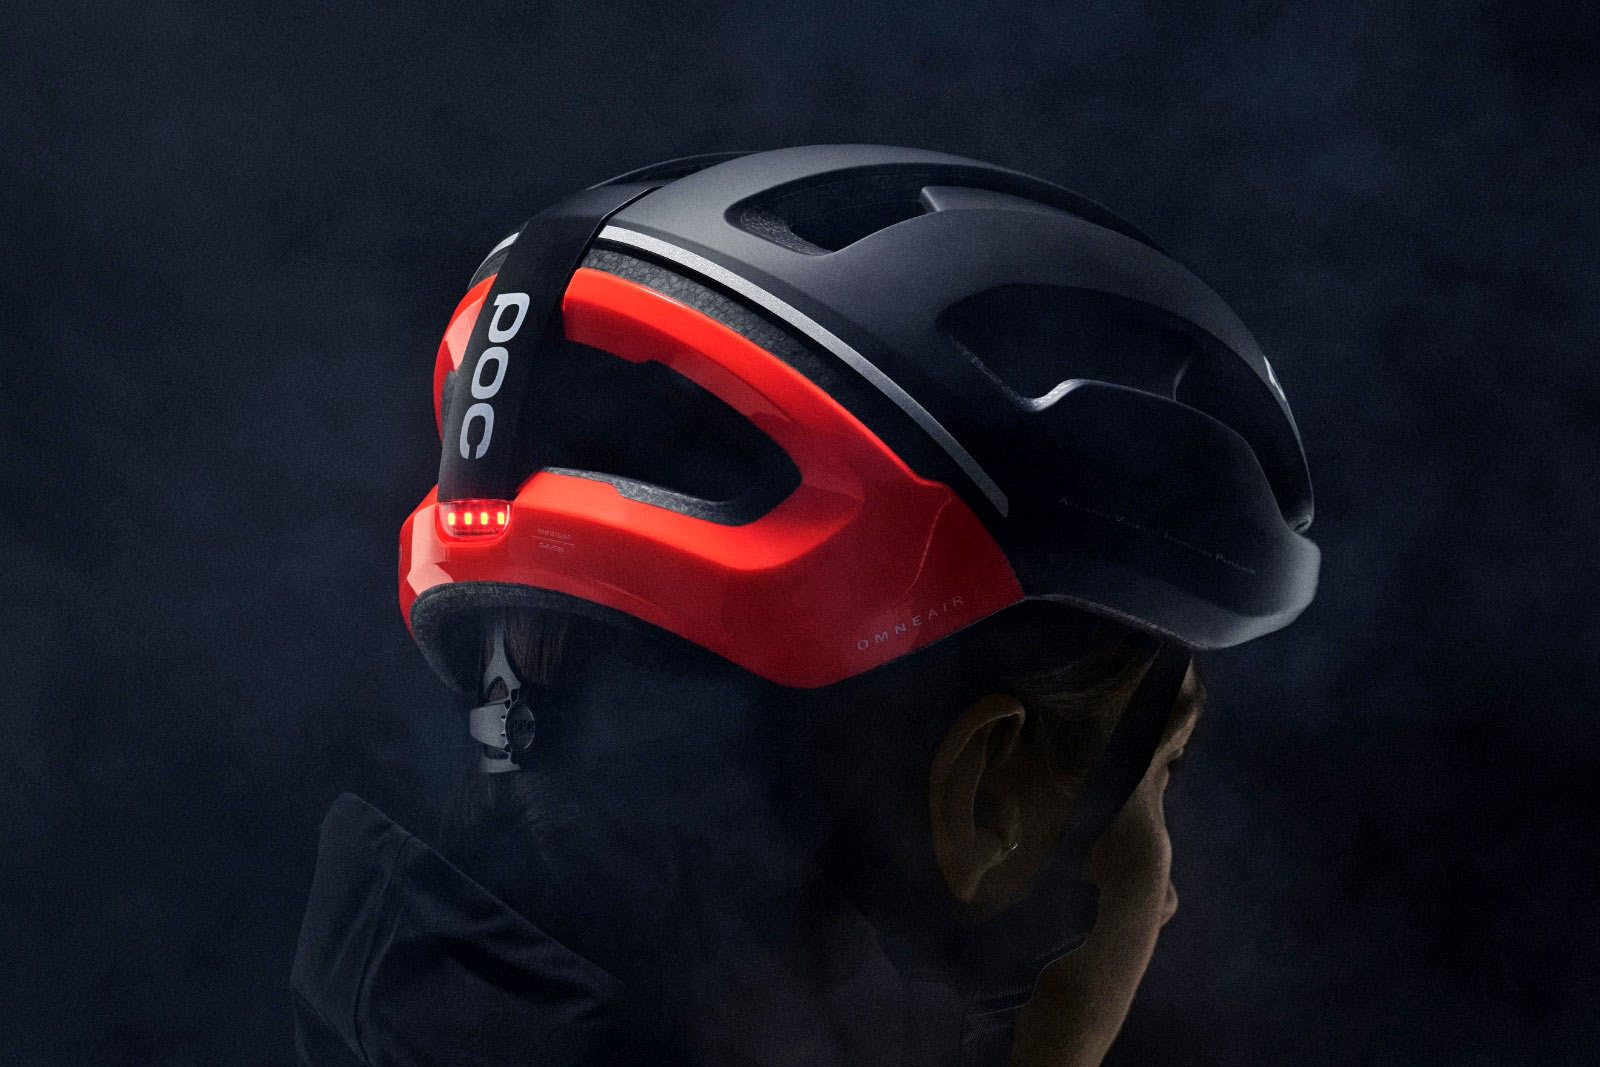 POC Omne Beacon helmet with integrated LED taillight